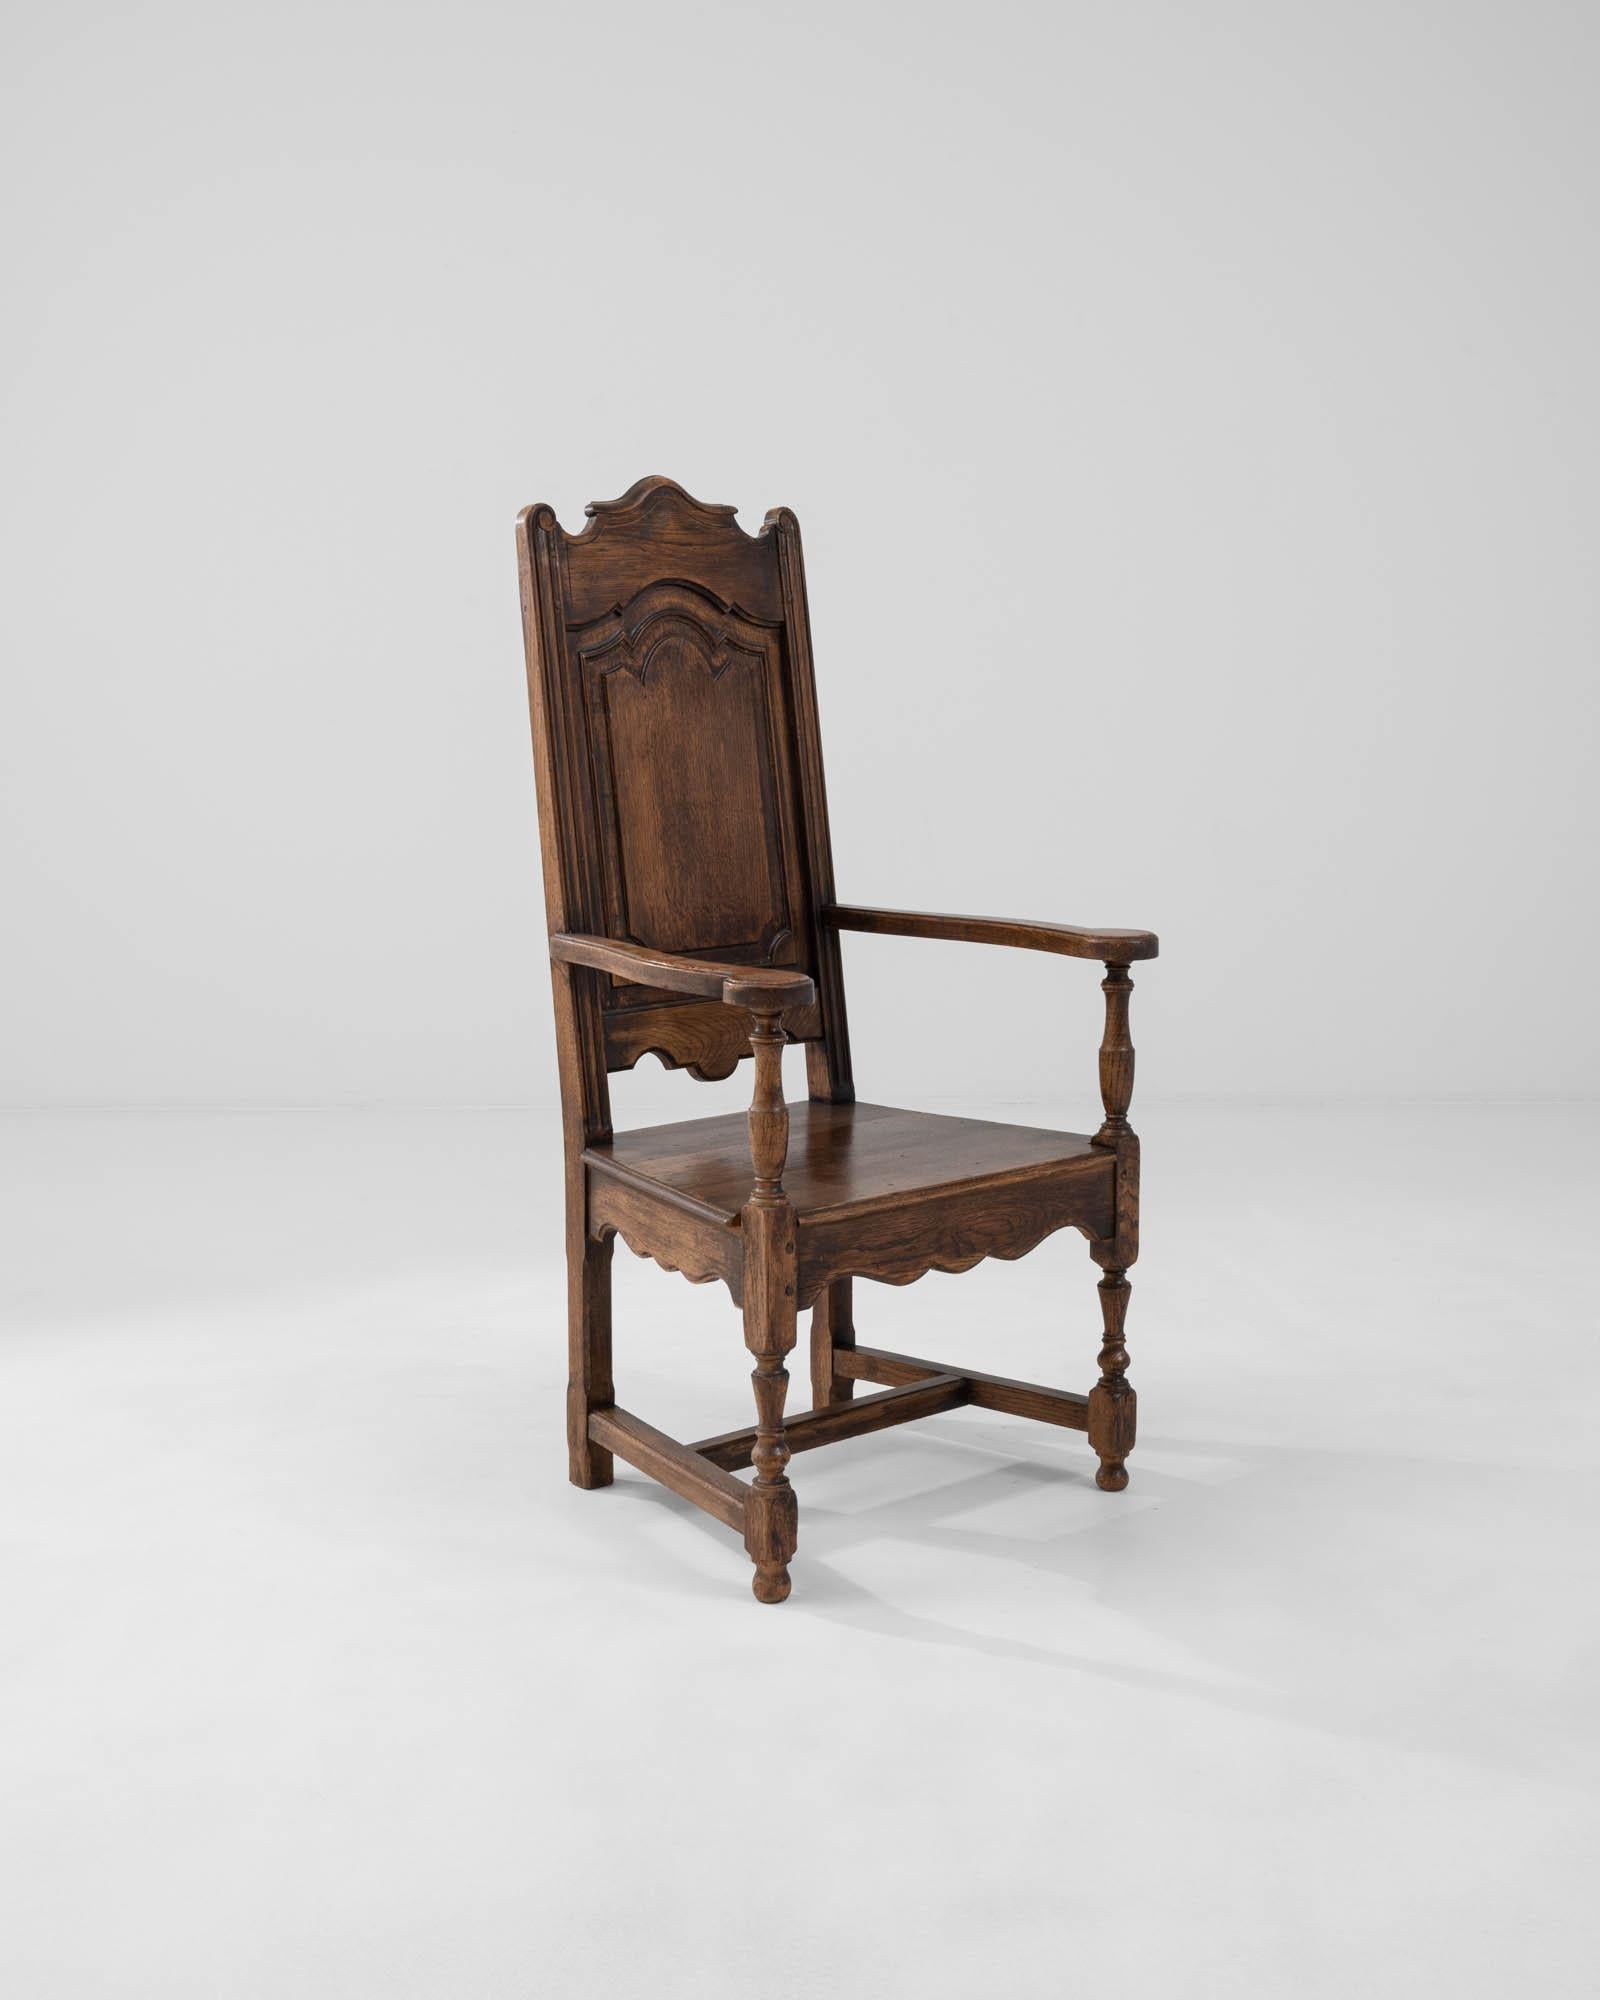 A wooden armchair created in early 20th century Belgium. High-backed and dignified, this sumptuous armchair radiates an aura of royal authority. Lavishly sculpted aprons, lathed legs, and a paneled back demonstrate a flair for the dramatic and